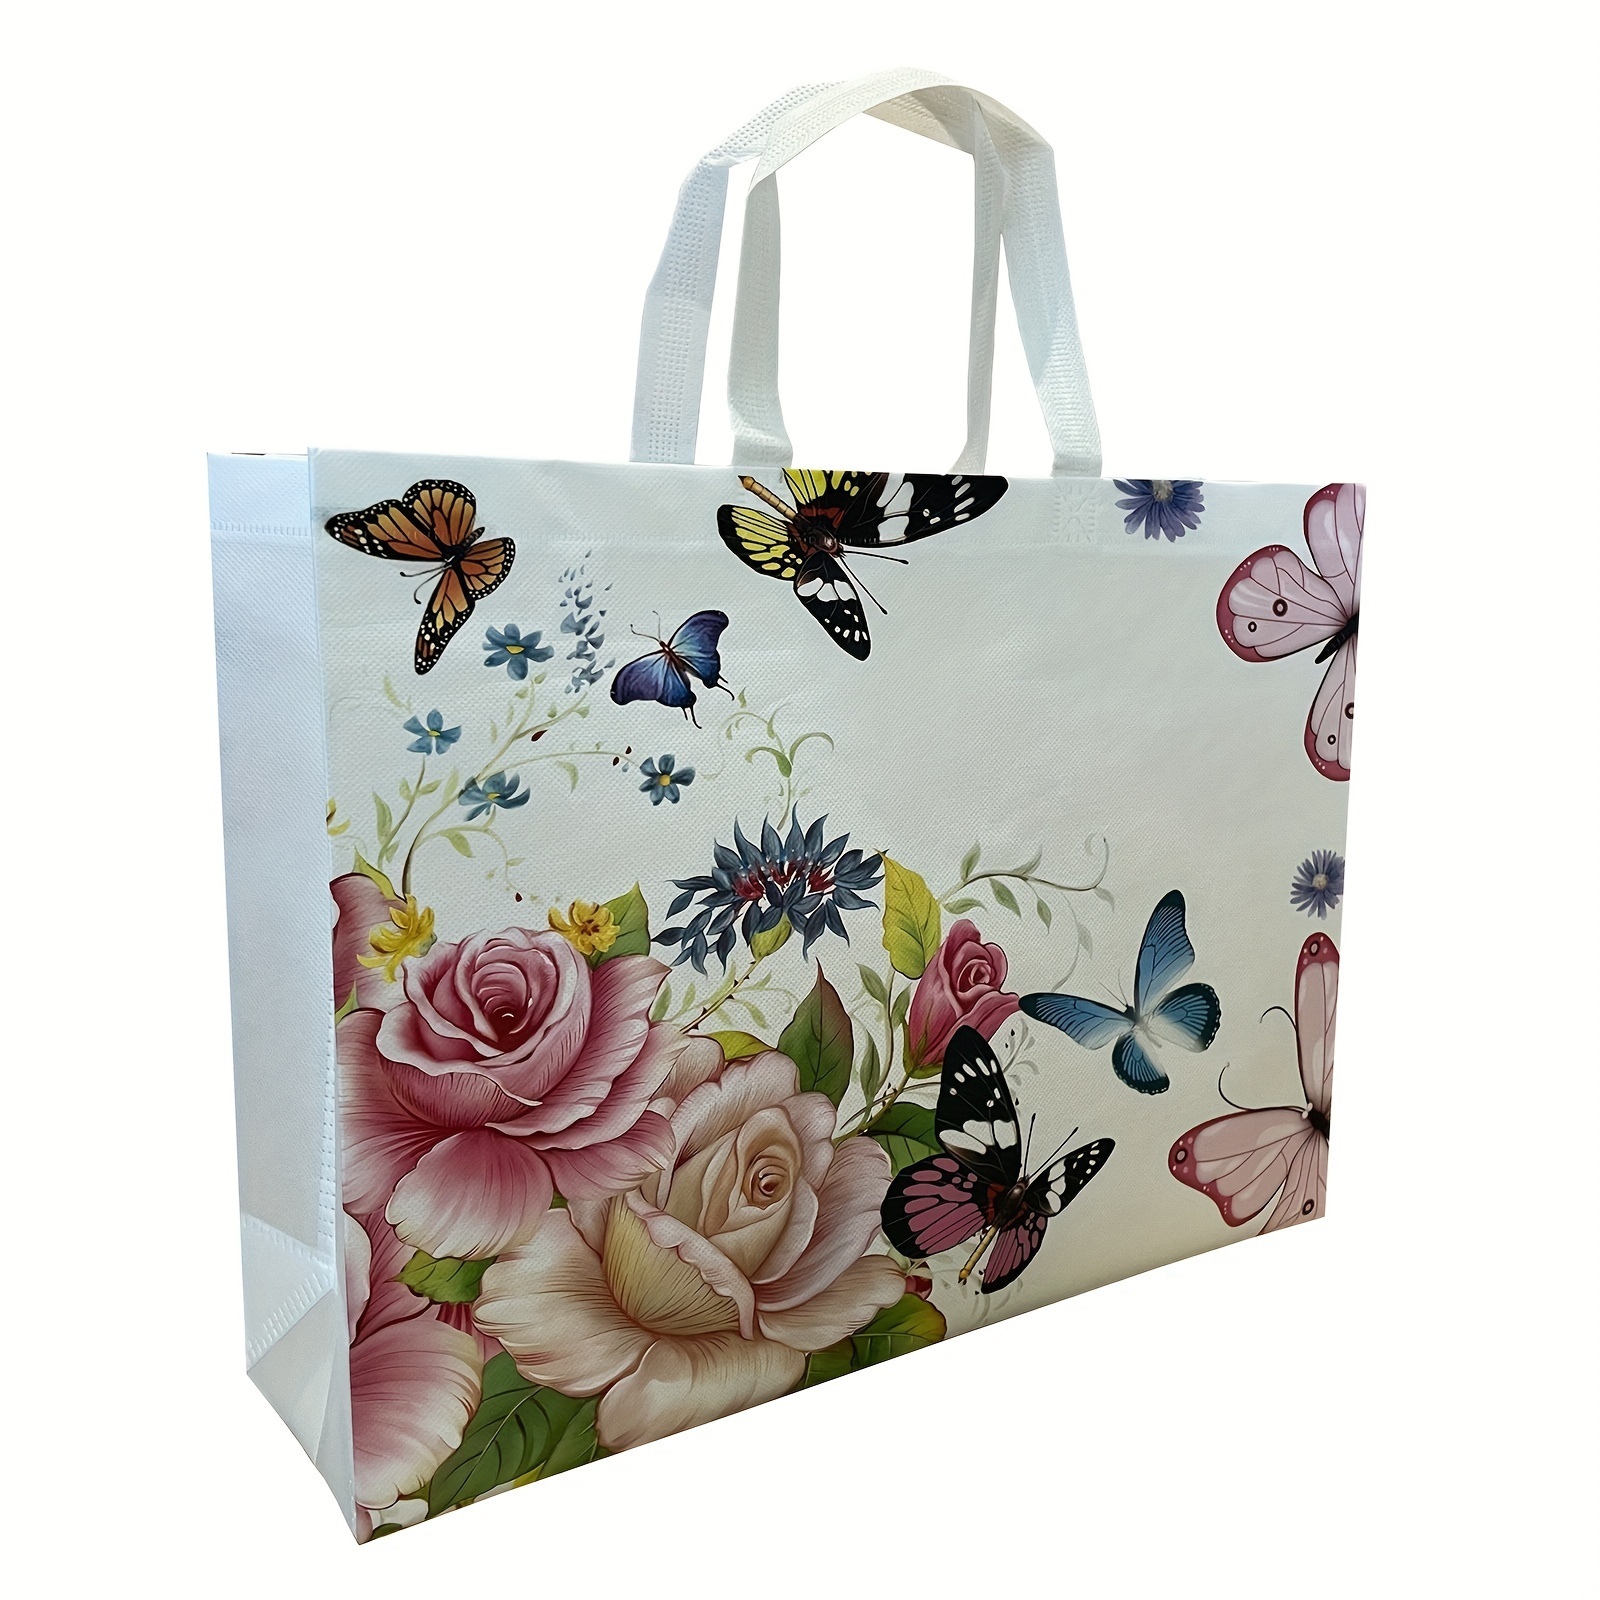 Pink Sunflower Butterfly Tote Bag Floral Tote Bag Plant 